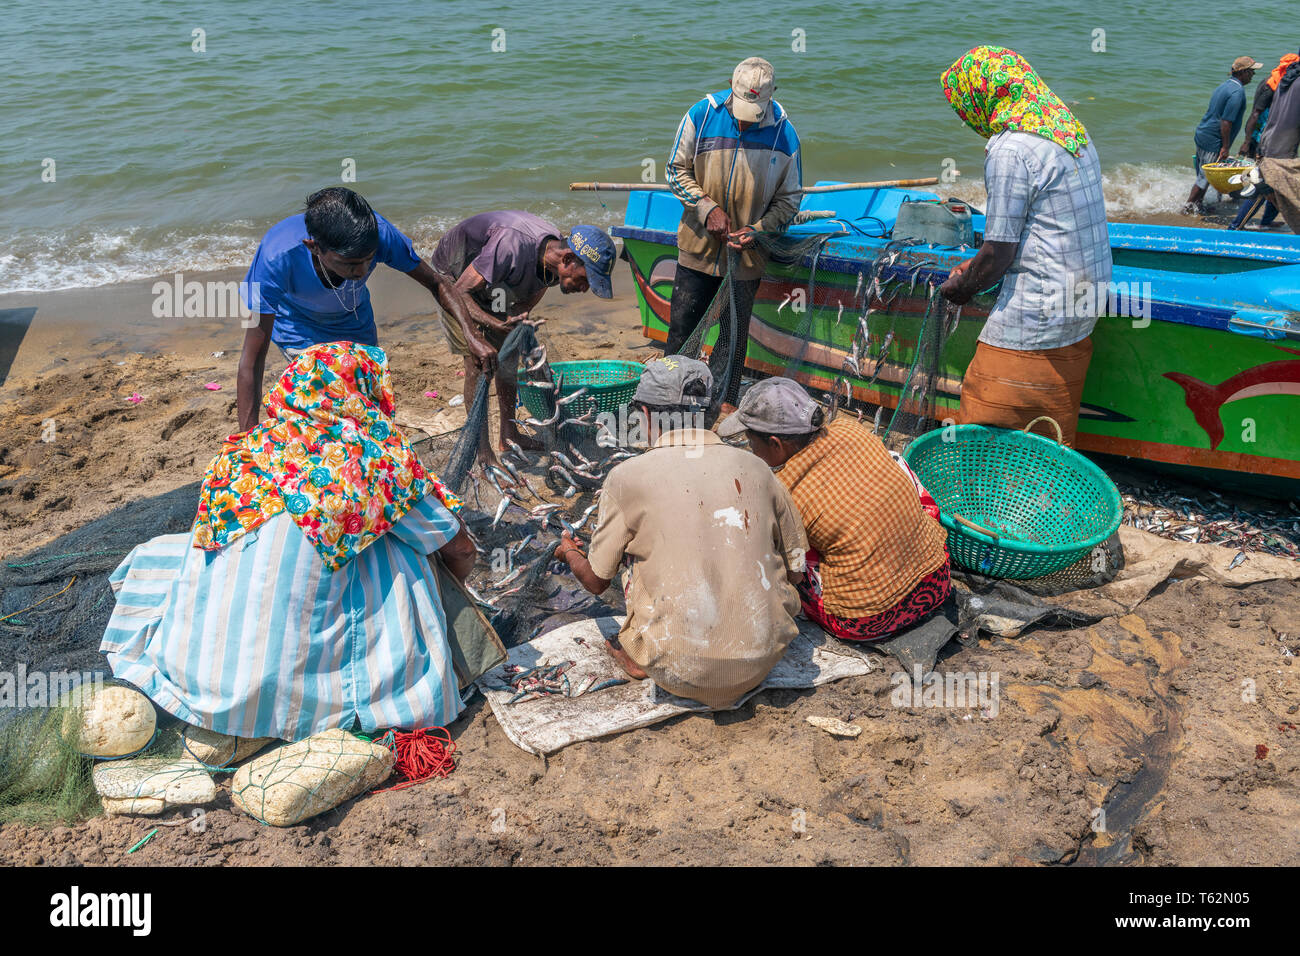 Negombo fishermen remove small silver fish by shaking their nets whilst crows circle overhead waiting for the opportunity to steal any easy pickings.  Stock Photo